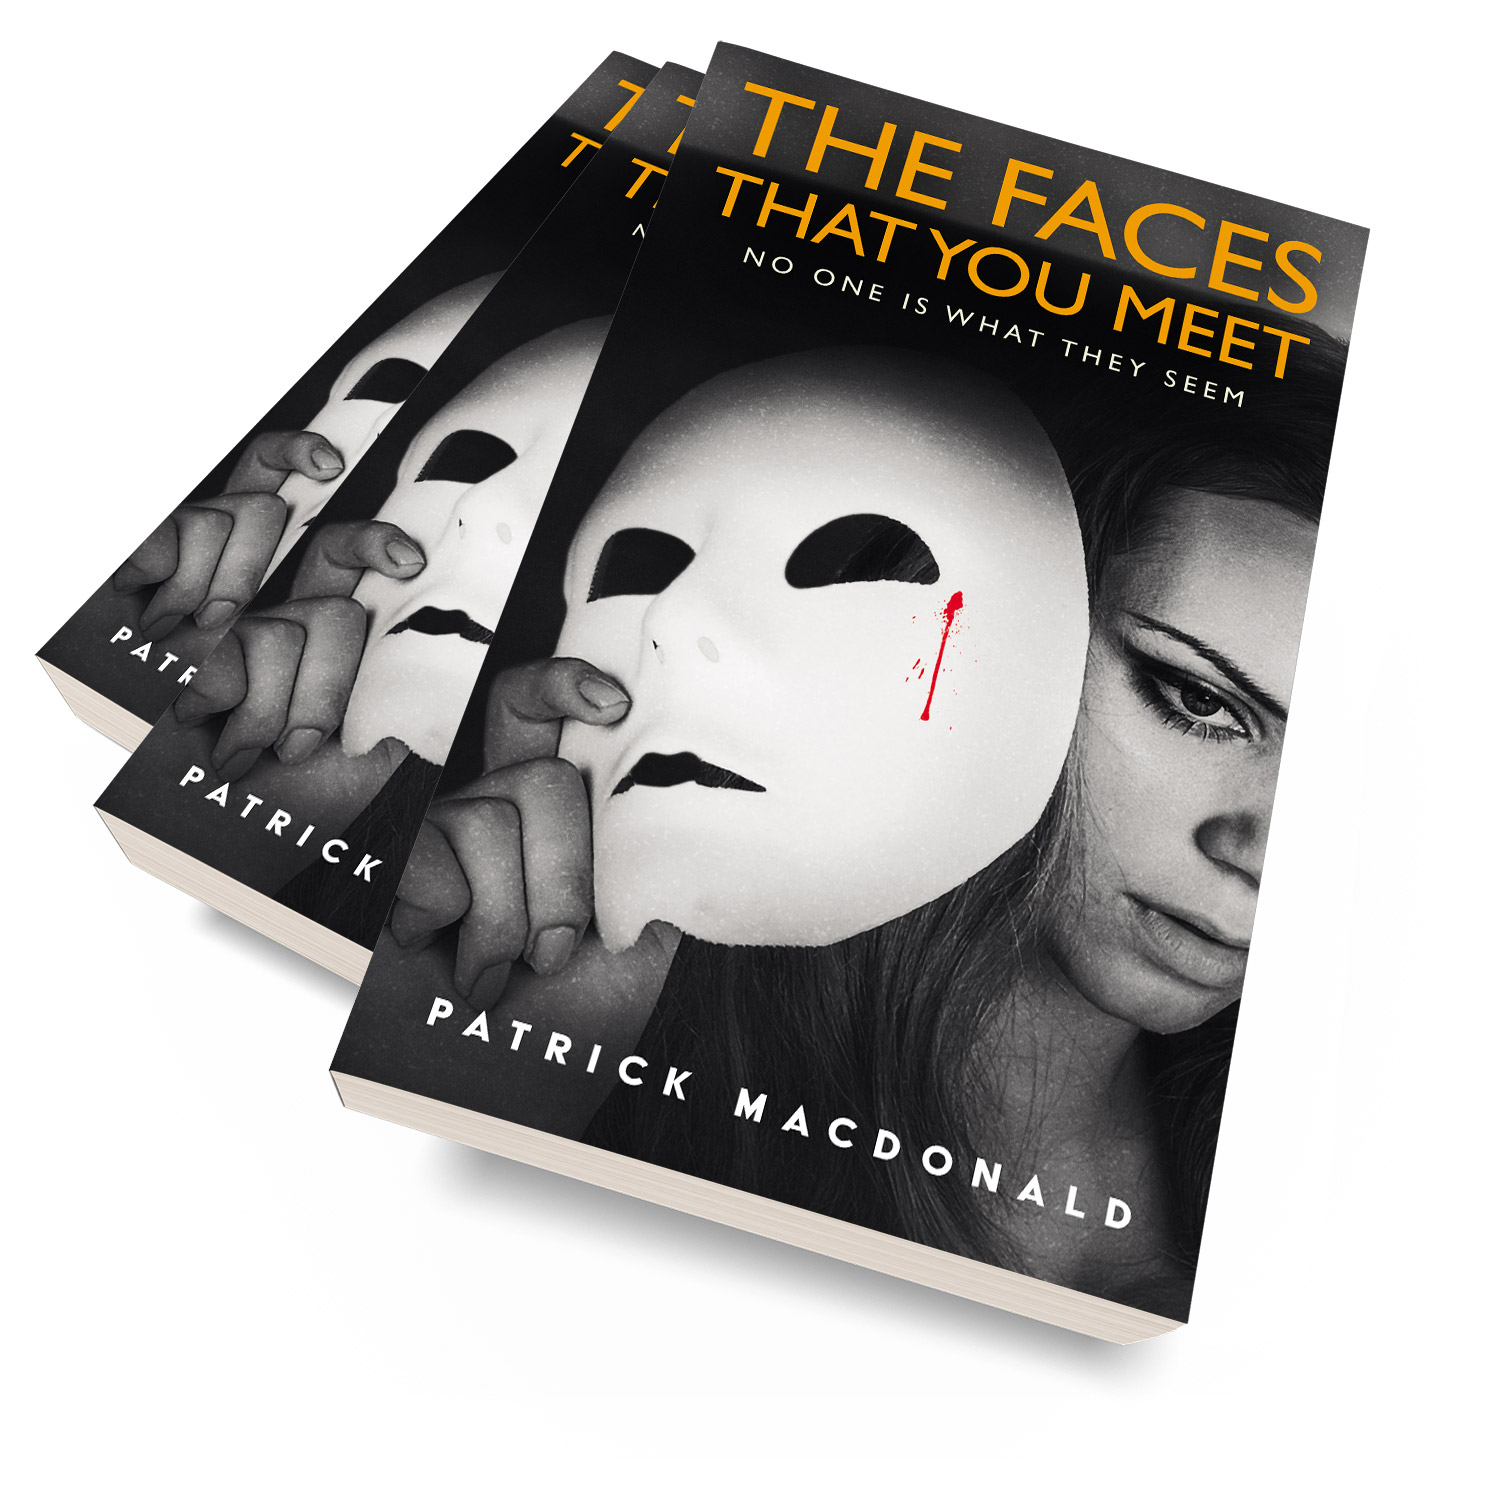 'The Faces That You Meet' is a dark, twisting thriller by Patrick Macdonald. The book cover design and interior formatting are by Mark Thomas. To learn more about what Mark could do for your book, please visit coverness.com.